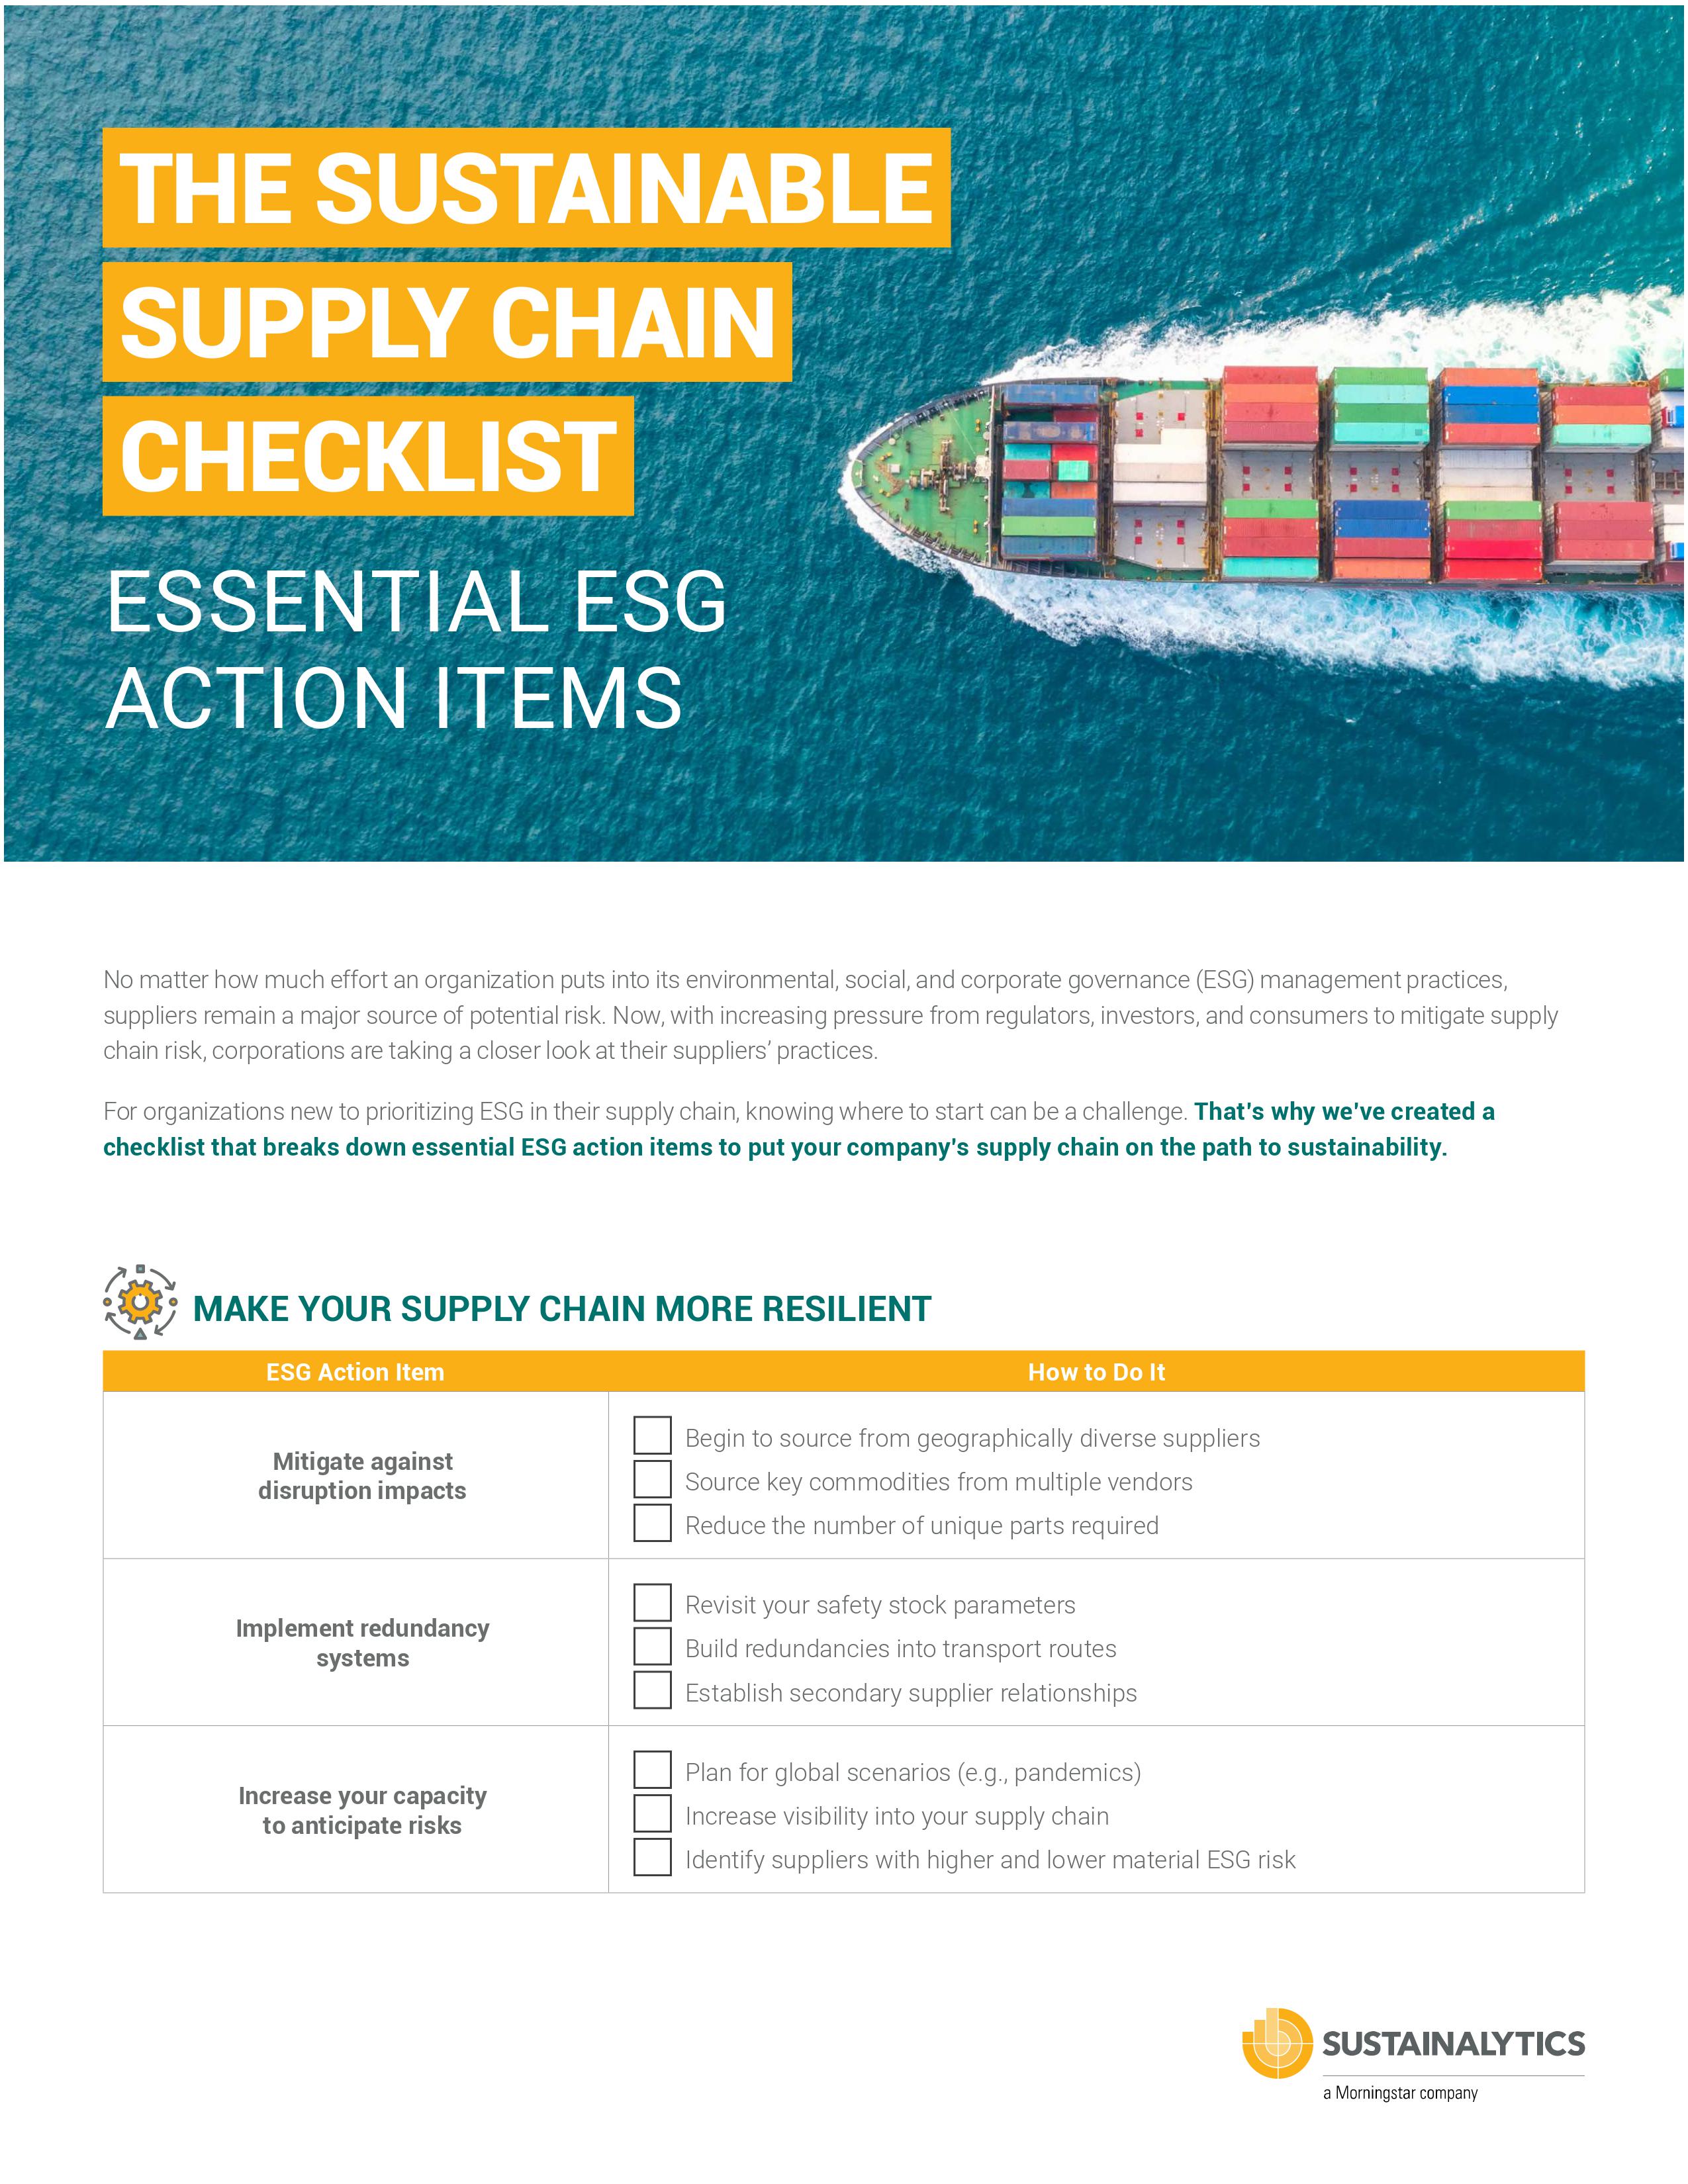 Download The Sustainable Supply Chain Checklist: 5 Essential ESG Action Areas for 2022